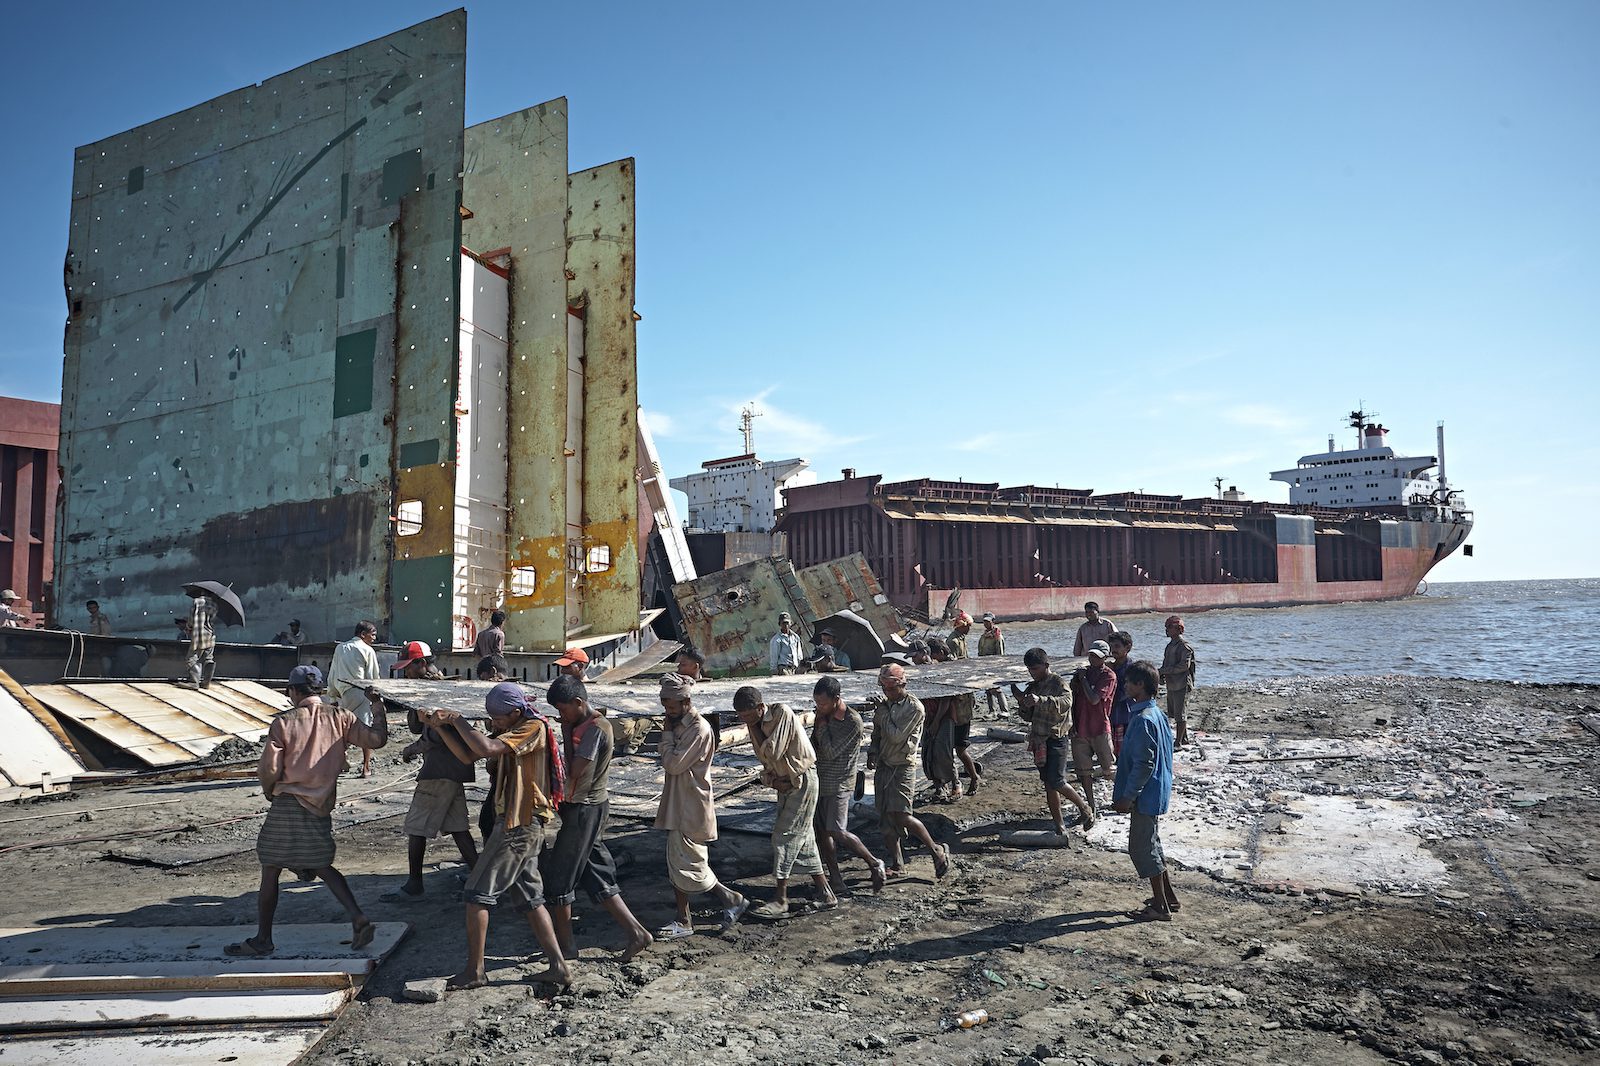 Bangladesh’s Infamous Shipbreaking Yards Launch Race for Cleaner, Safer Future